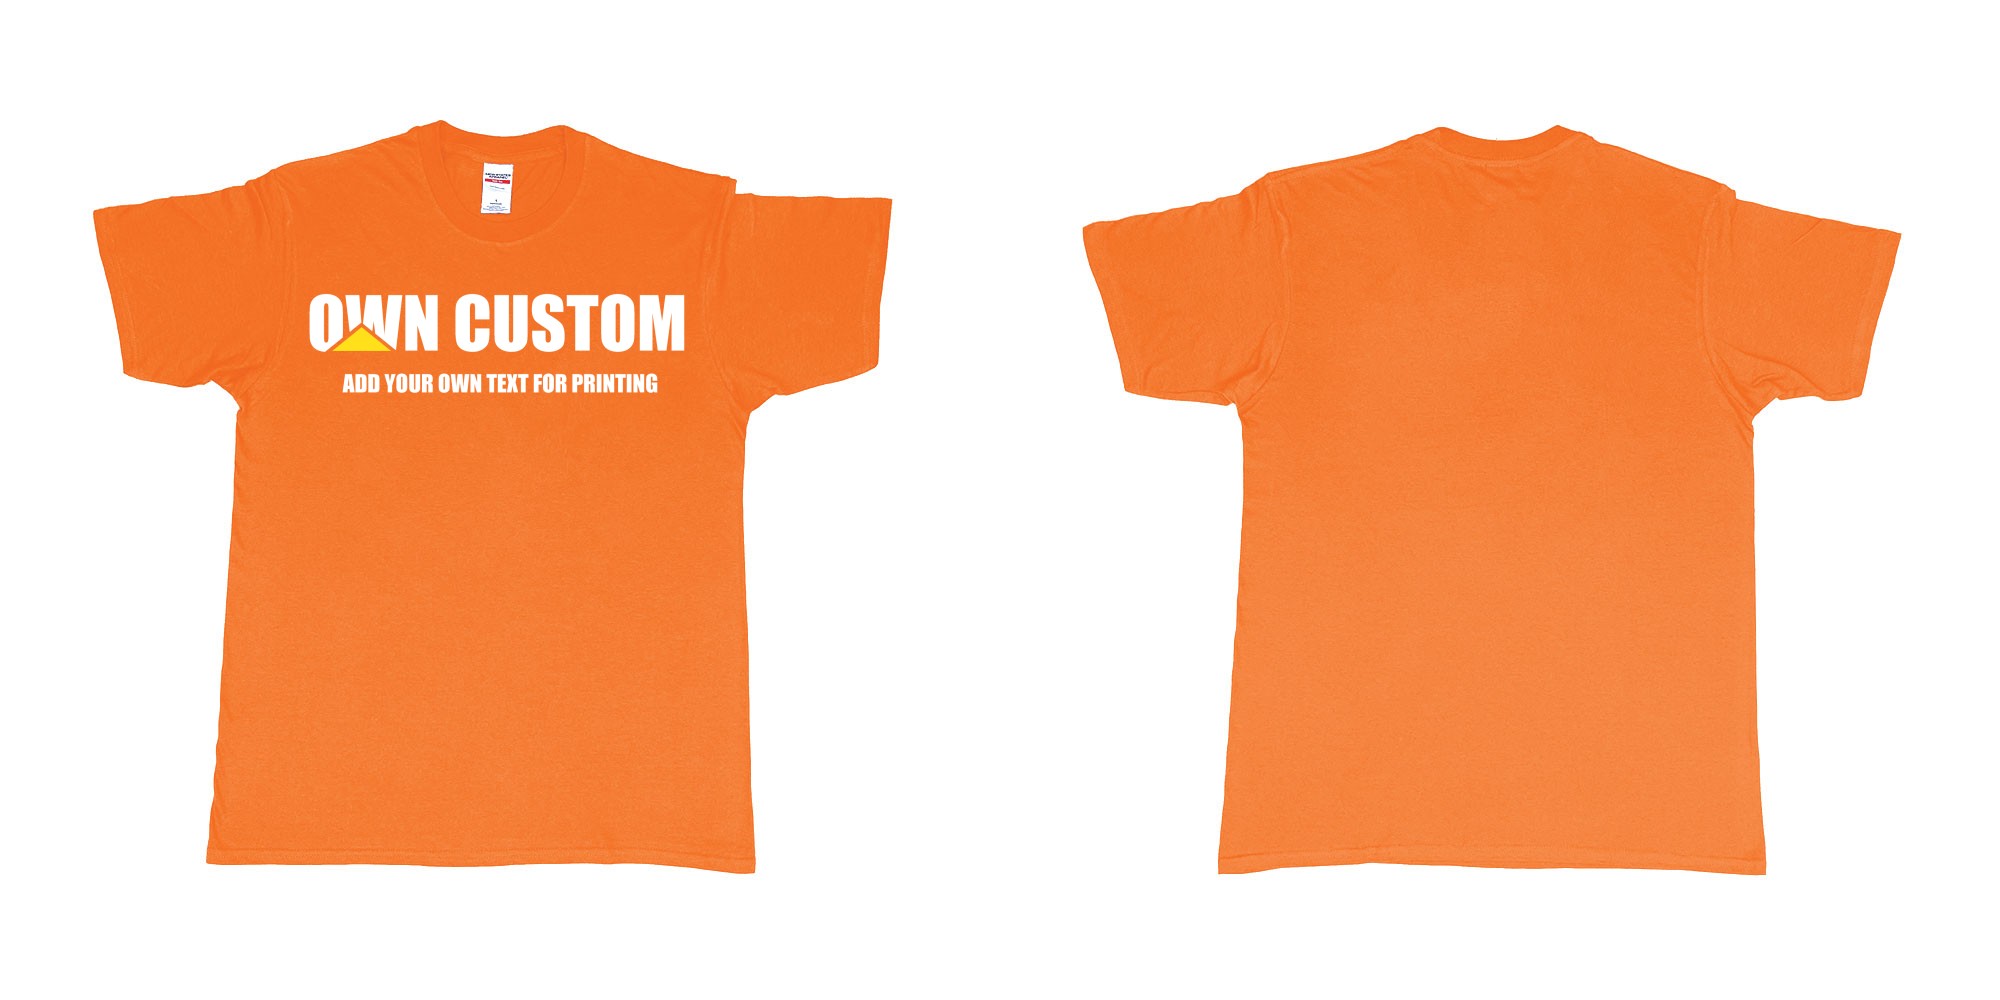 Custom tshirt design caterpillar inc logo custom text printing shirt in fabric color orange choice your own text made in Bali by The Pirate Way